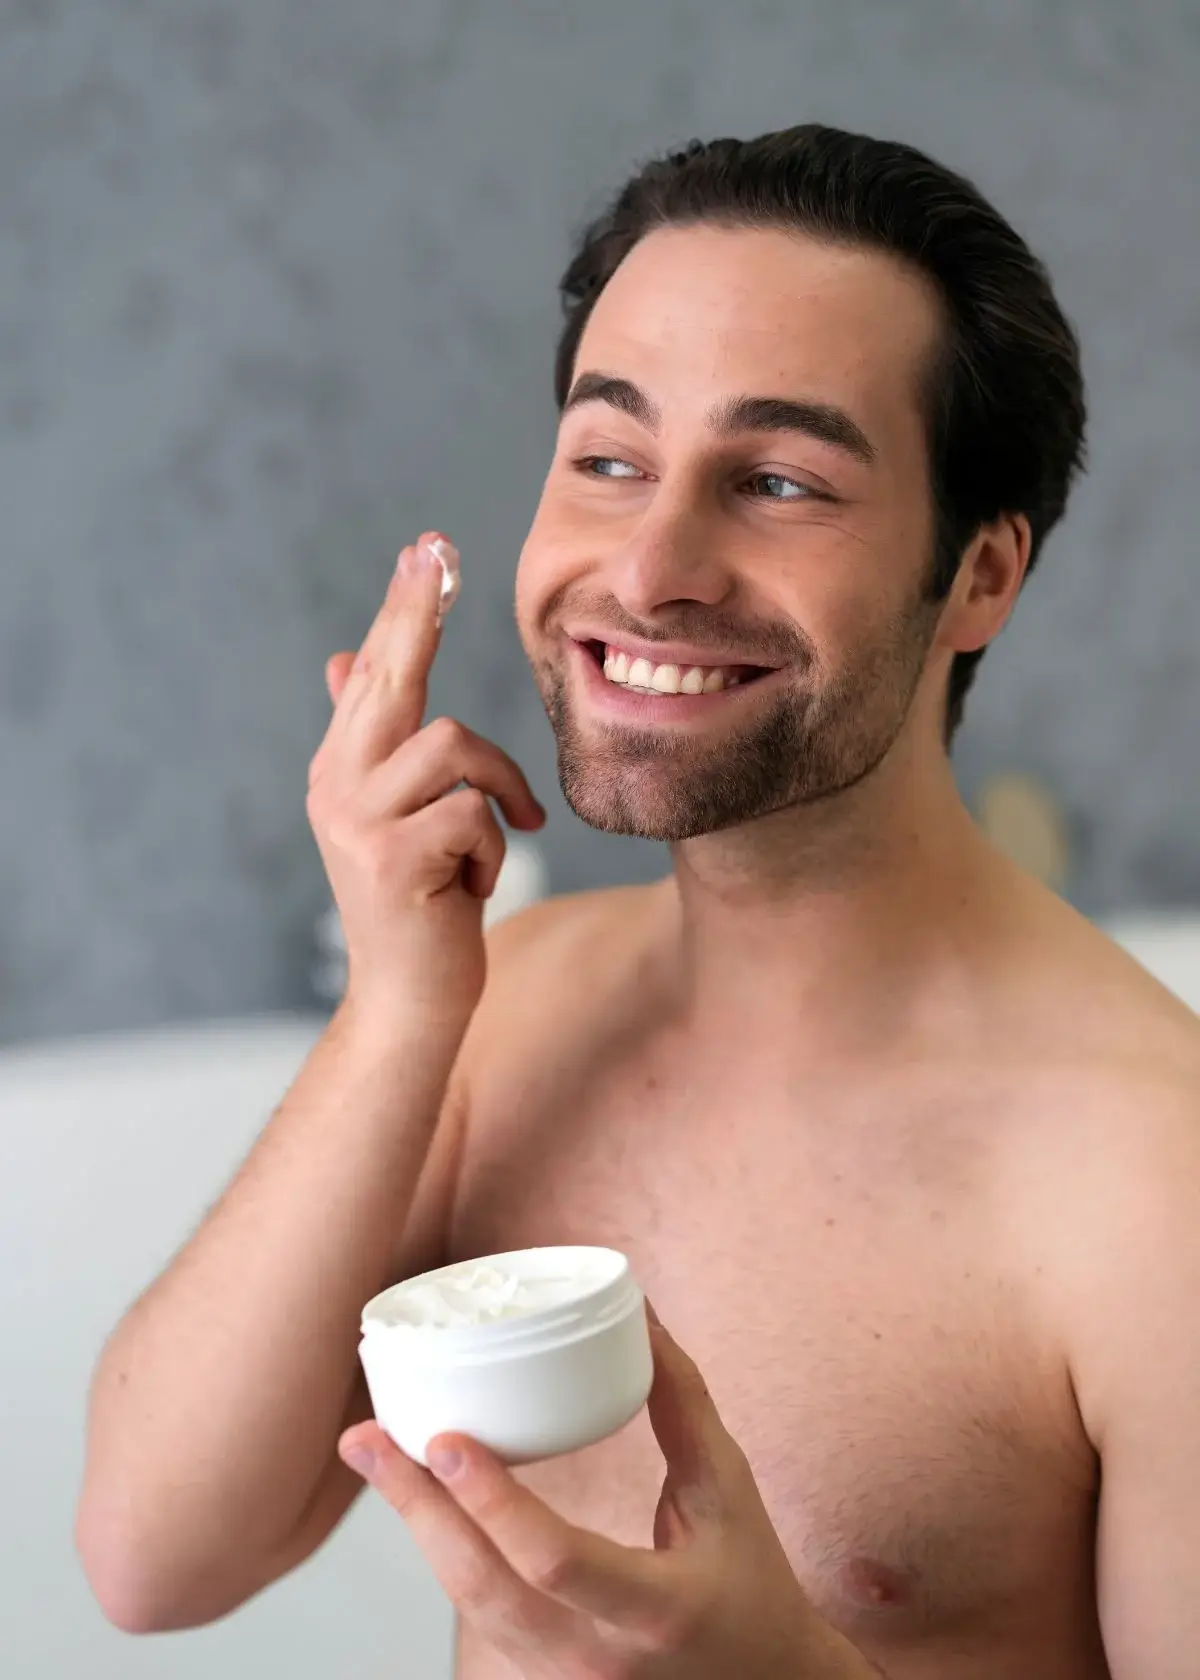 How to choose right face scrub for men?